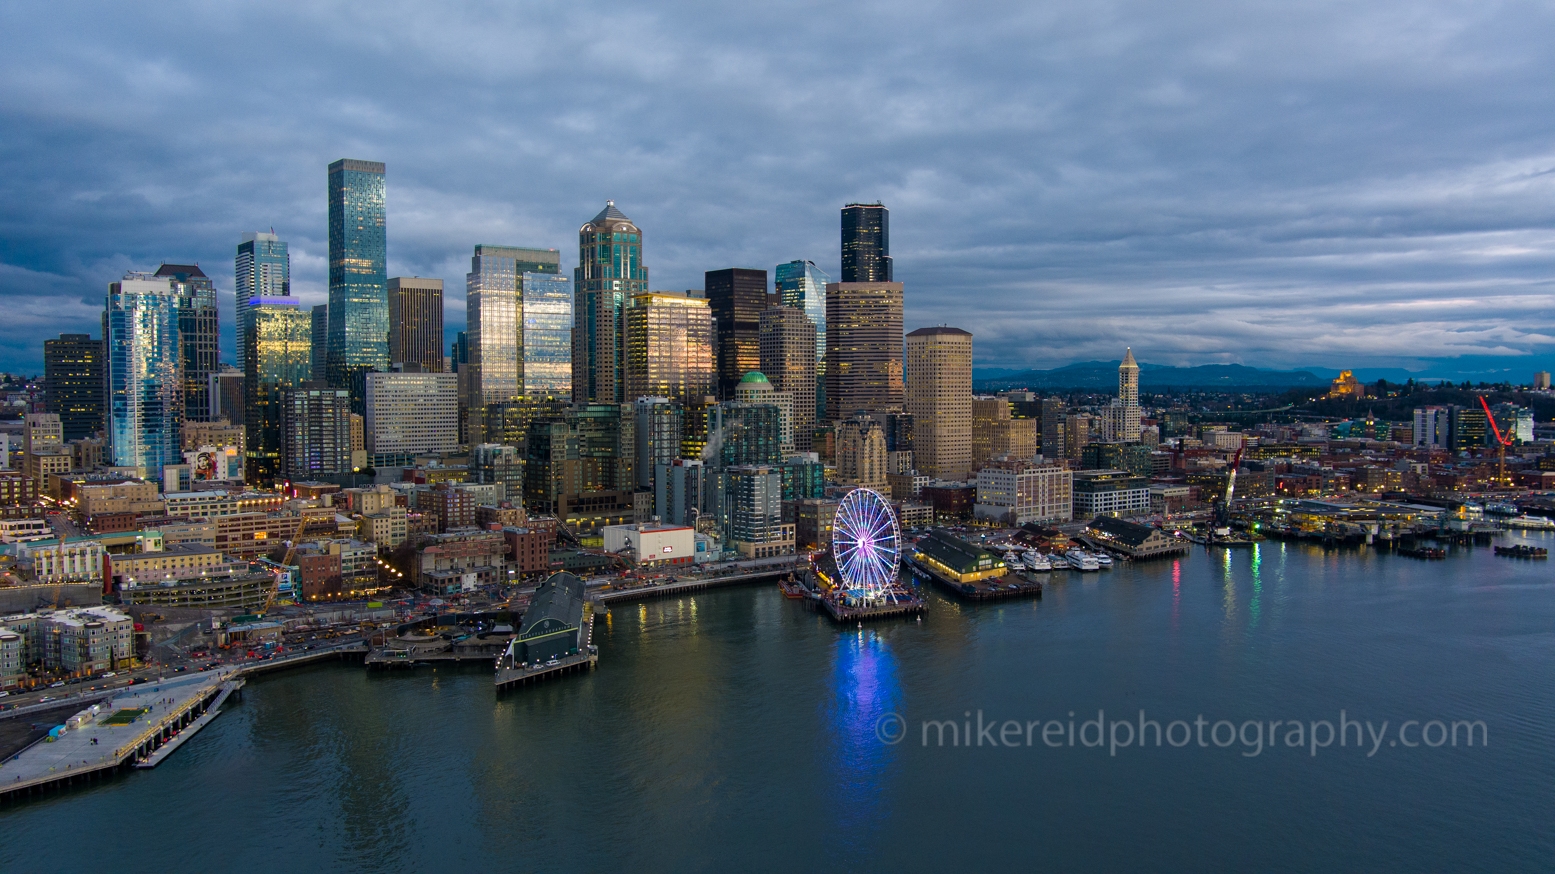 Over Seattle Blue Hour Skyline.jpg Aerial views over Seattle and surroundings in these unique video and photographic perspectives. To arrange a custom Seattle aerial photography tour, please contacct me. #seattle